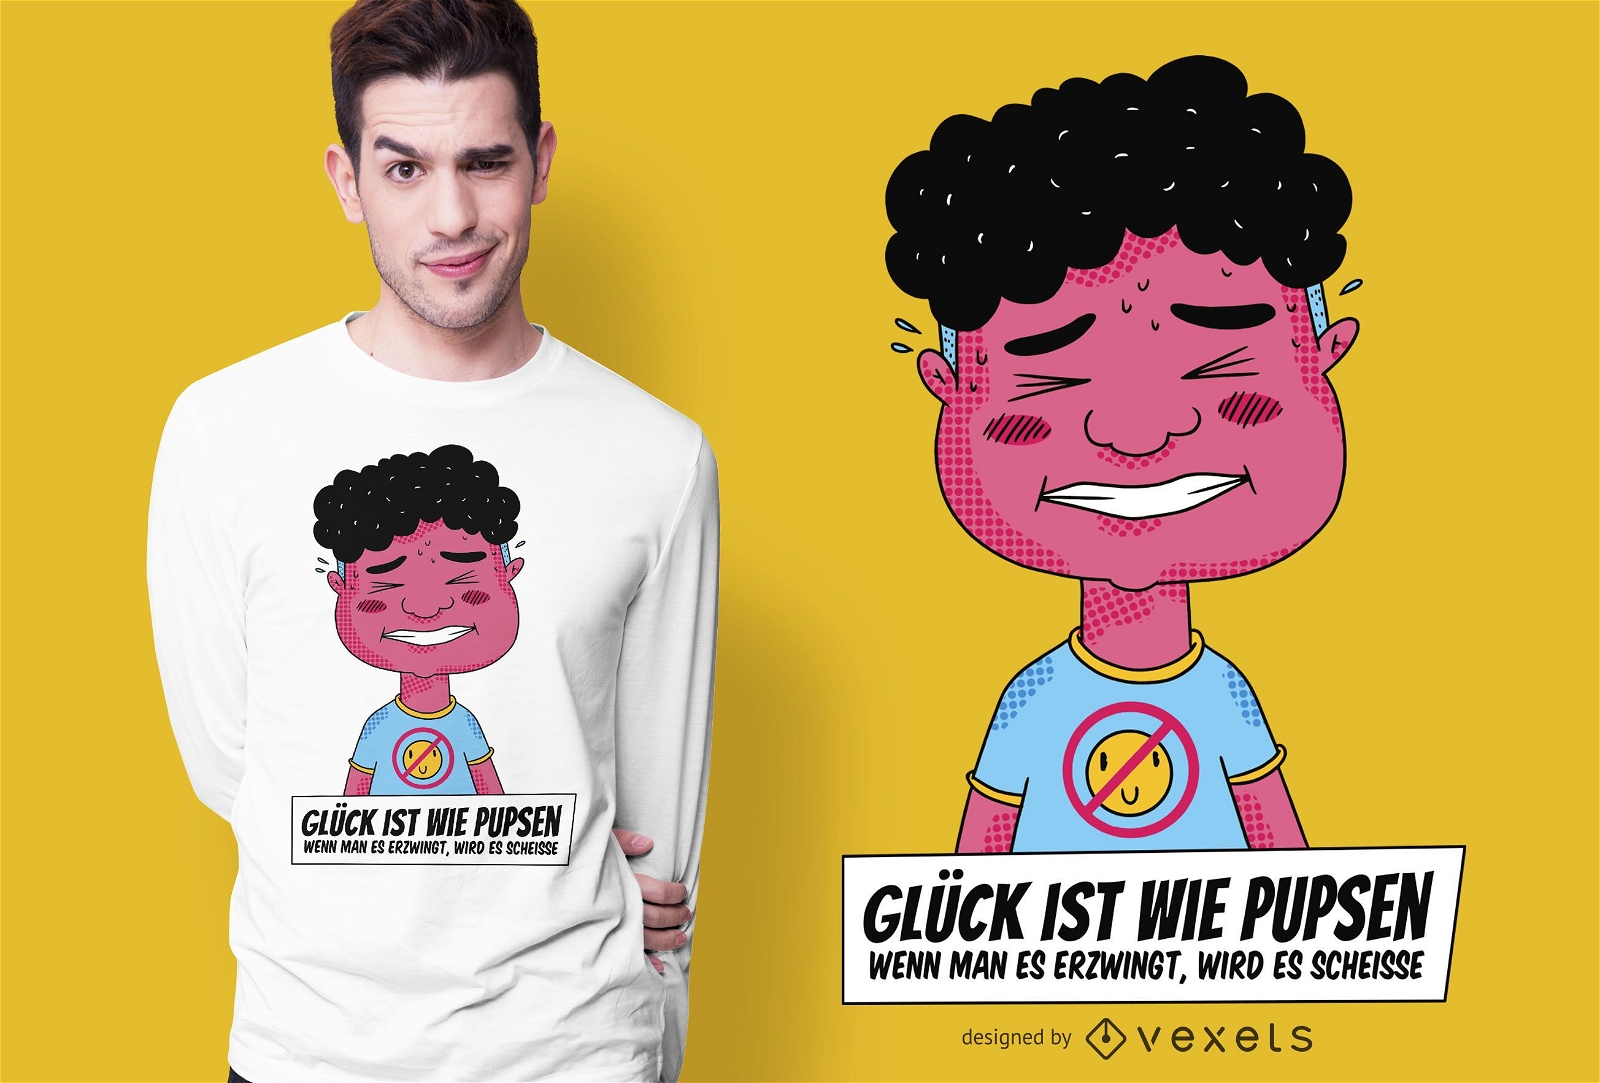 Funny life german quote t-shirt design